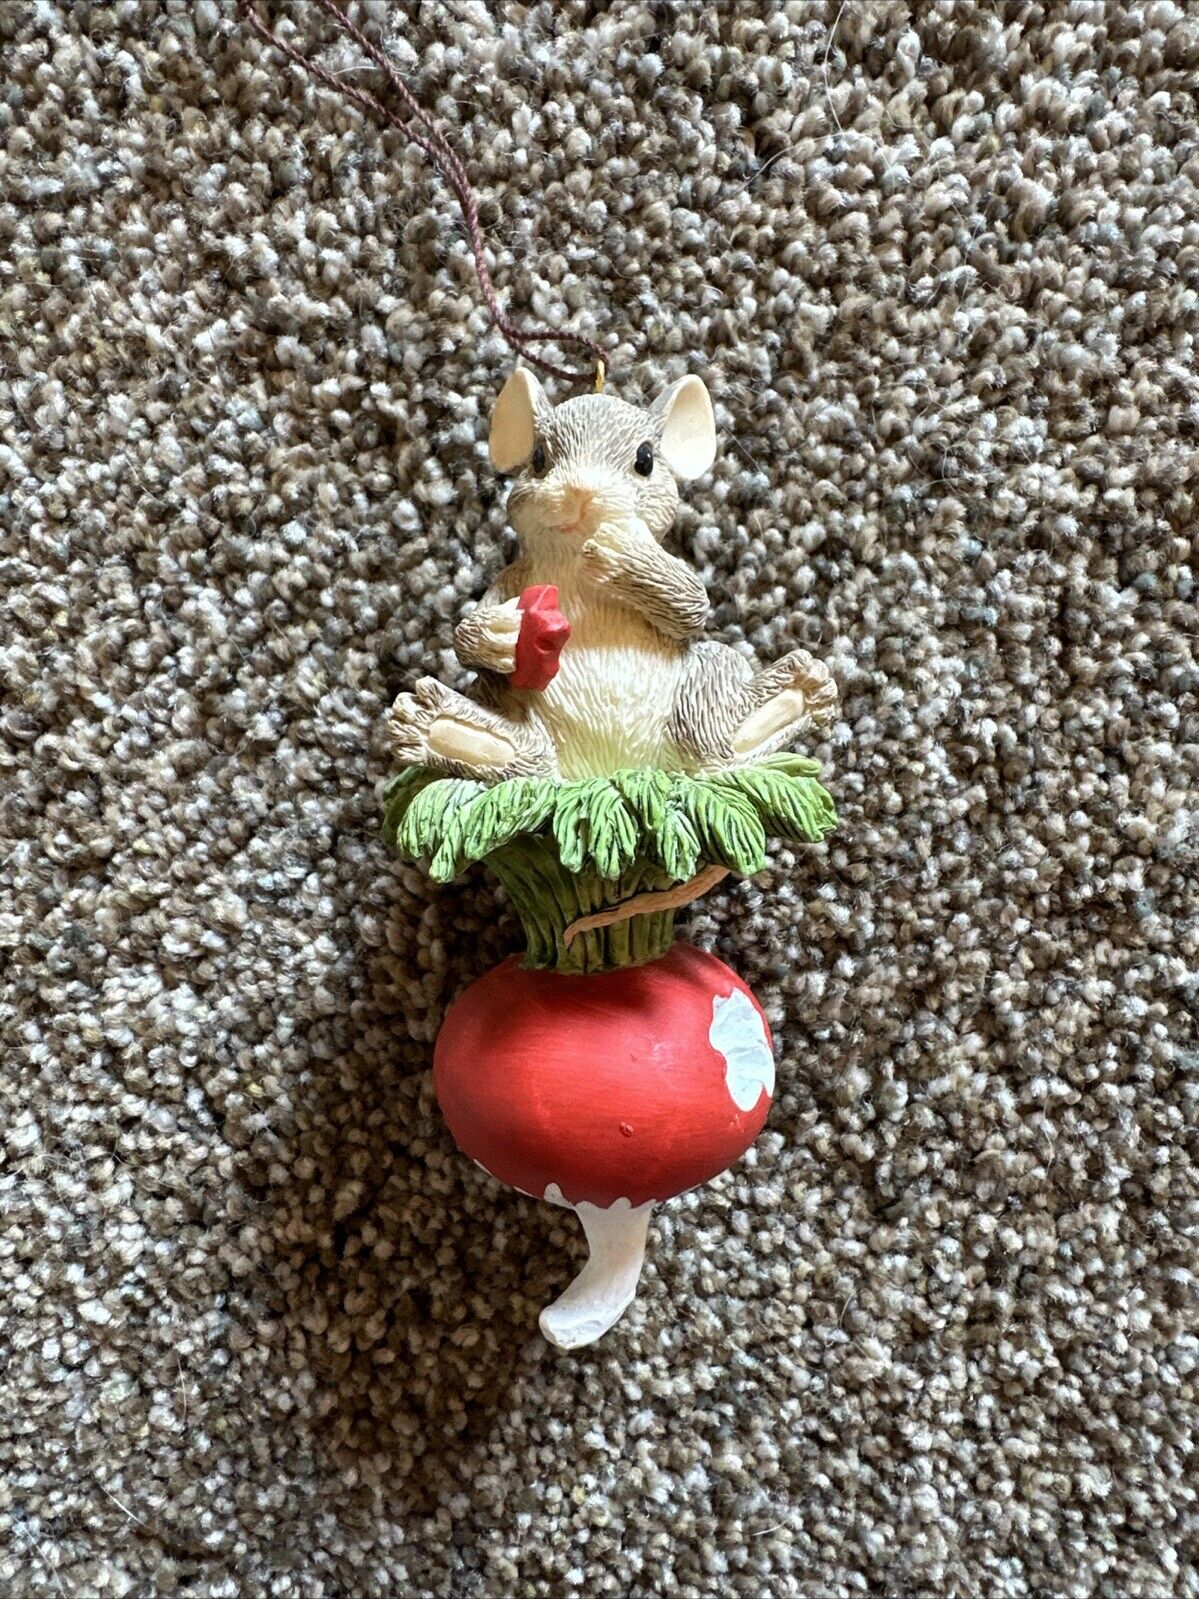 “This Is Hot” Ornament RETIRED Charming Tails mouse & radish figurine